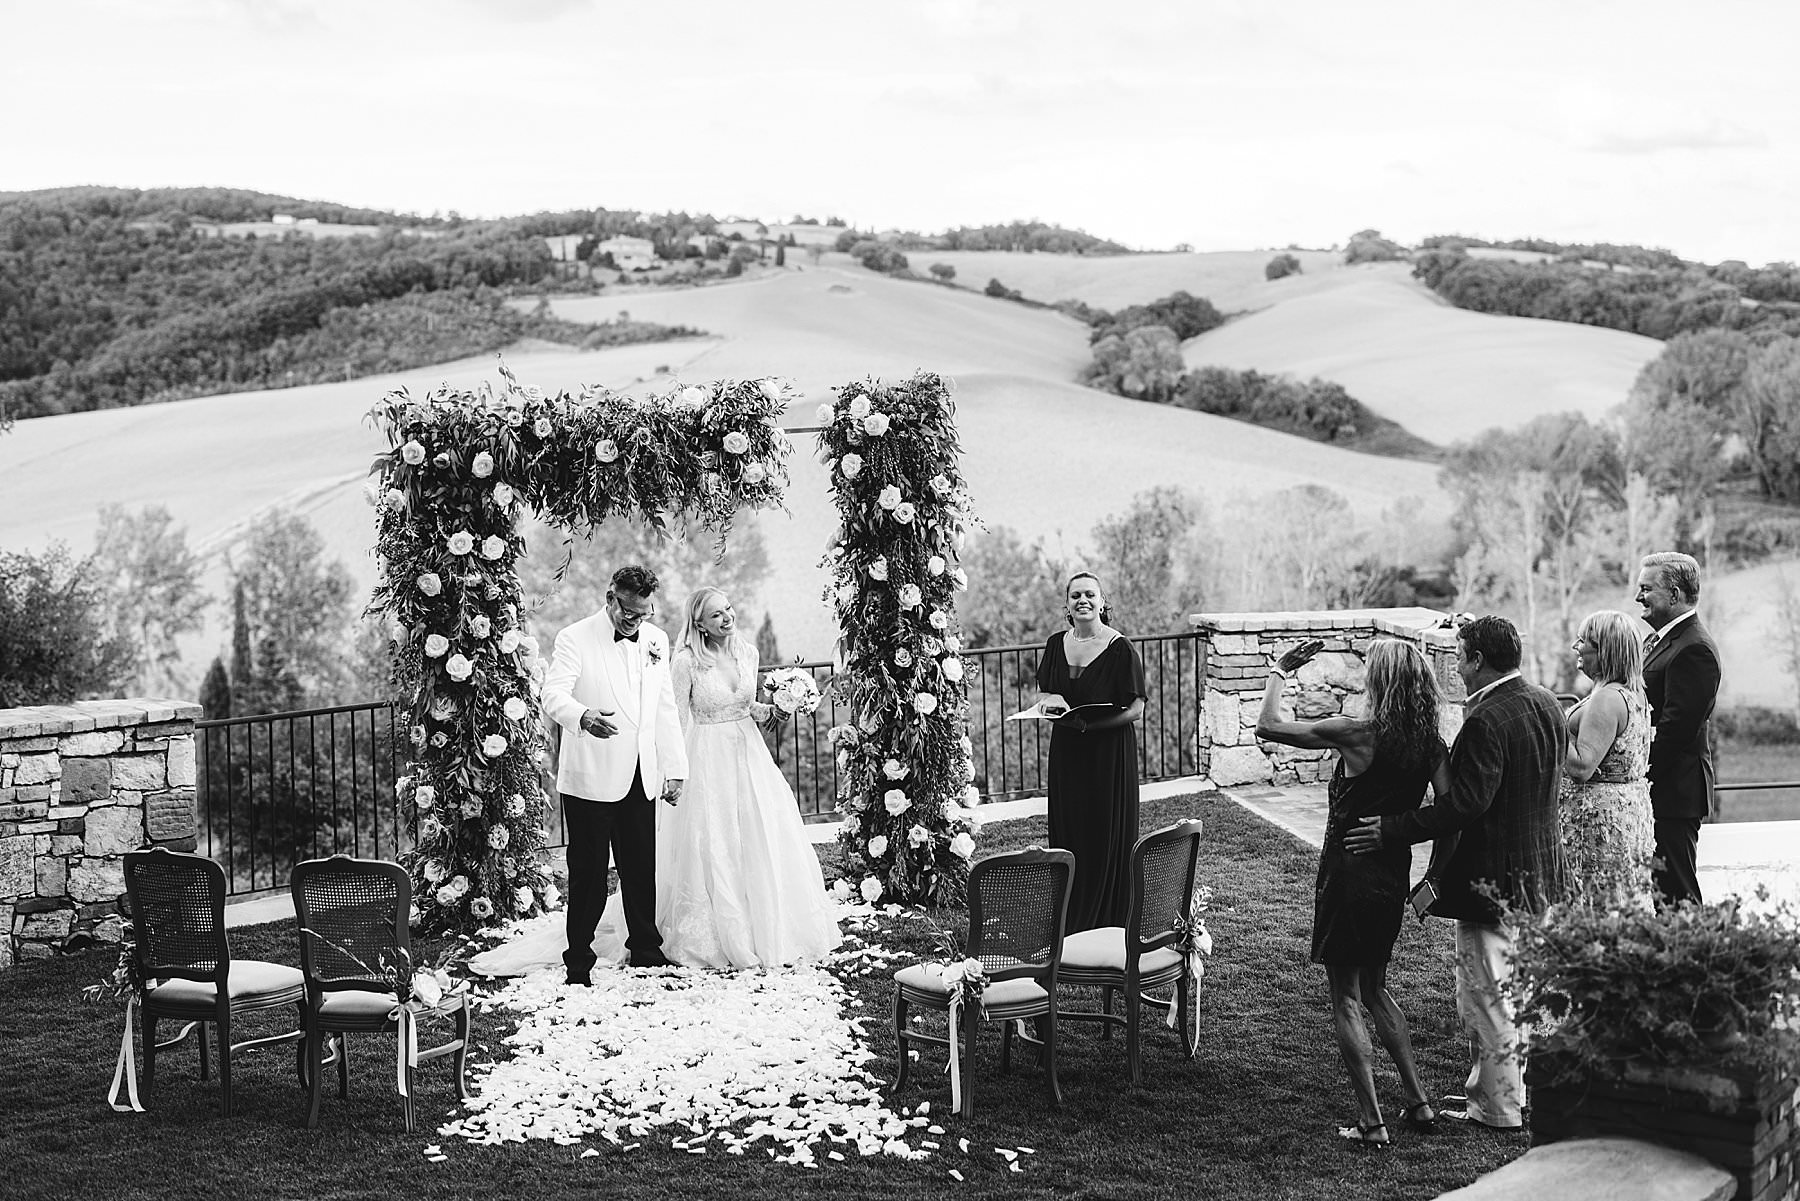 Exclusive intimate elopement in Tuscany at Borgo Pignano with breathtaking countryside view